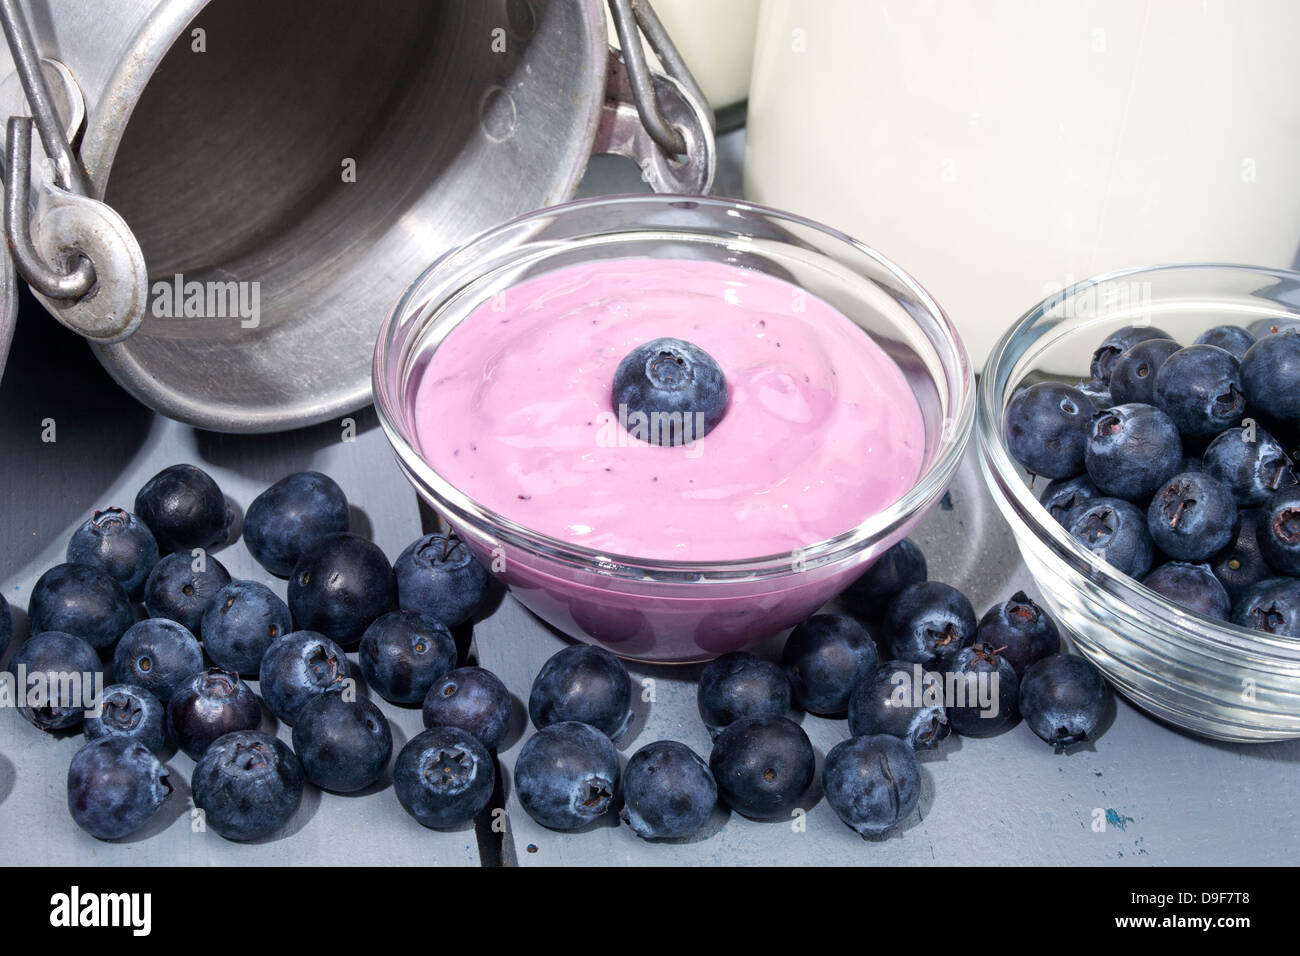 Glass bowl with yoghurt and blueberrys, Glass bowl with yoghurt and blueberries Stock Photo